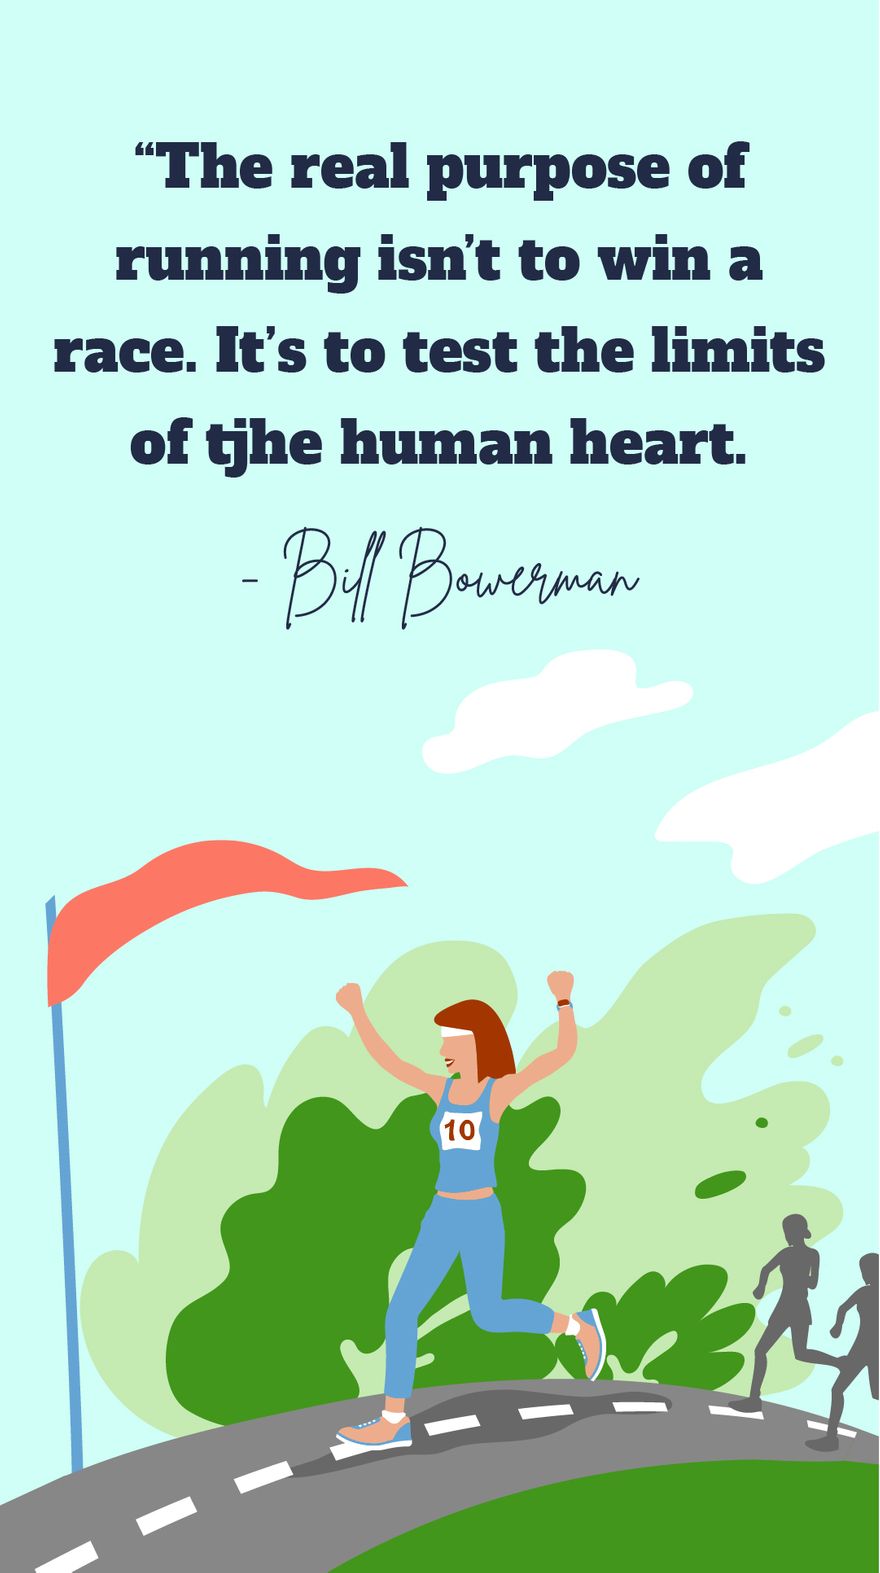 Bill Bowerman-The real purpose of running isn’t to win a race. It’s to test the limits of the human heart.